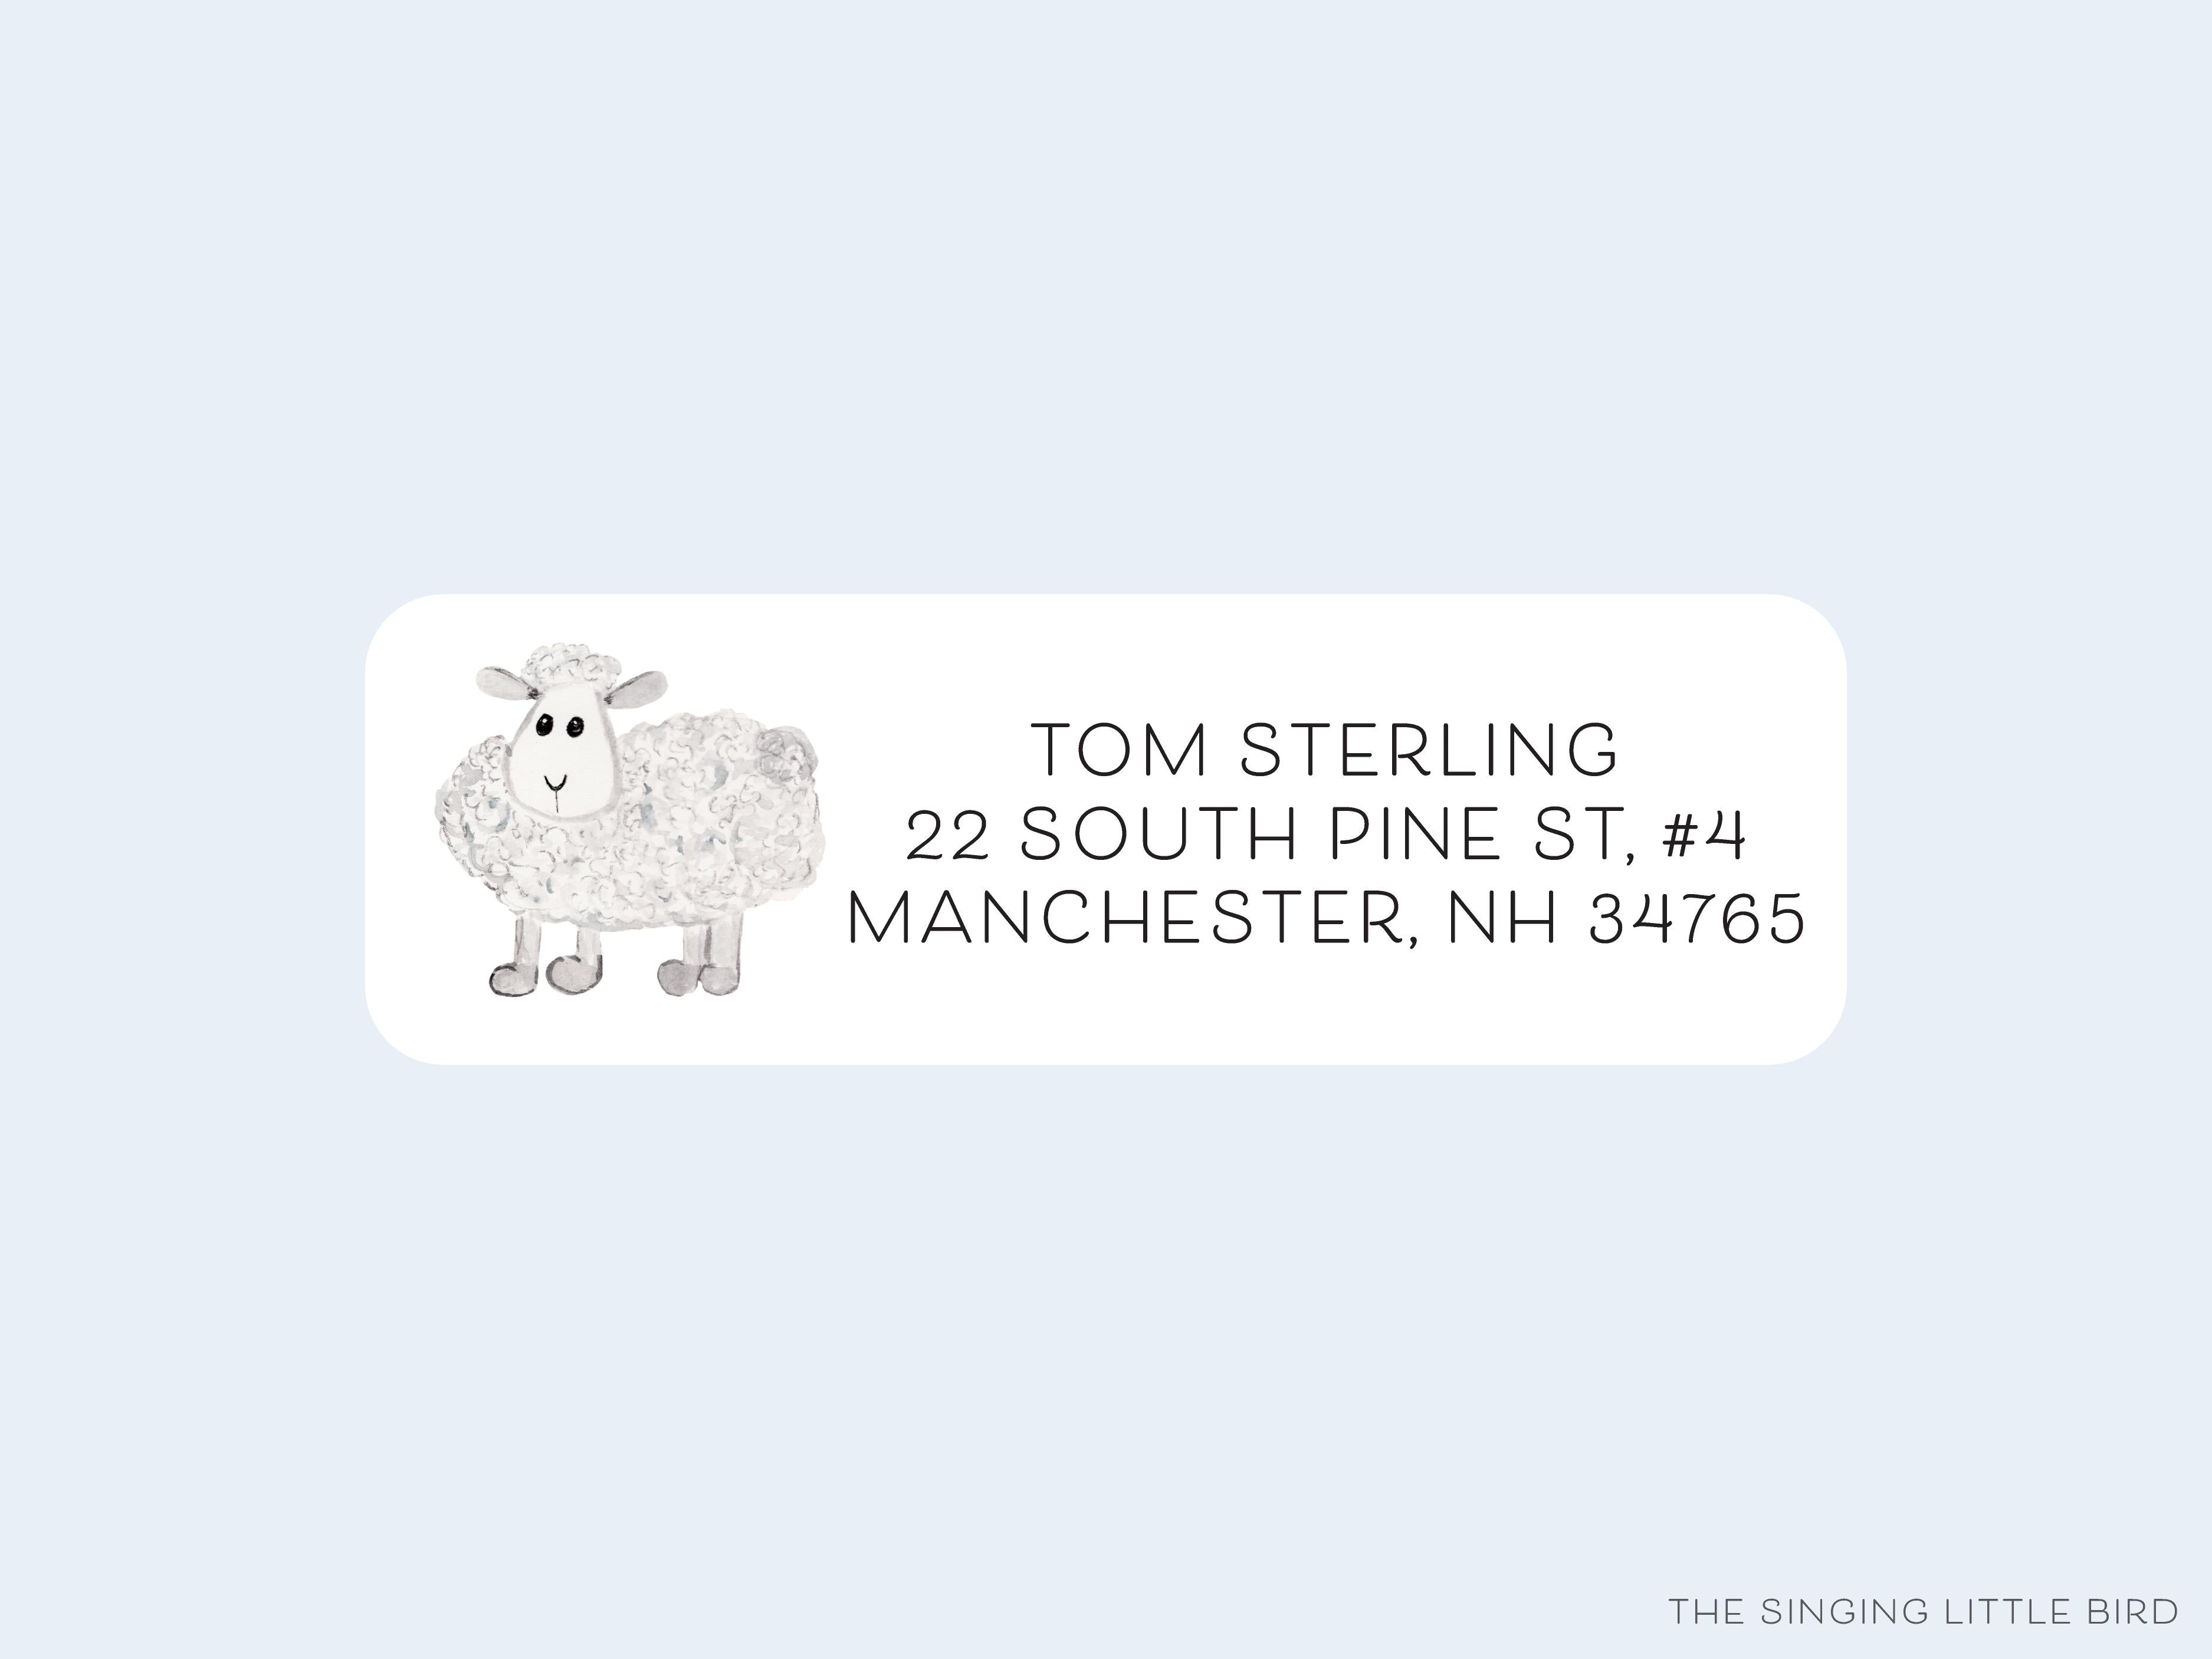 Sheep Return Address Labels- These personalized return address labels are 2.625" x 1" and feature our hand-painted watercolor sheep, printed in the USA on beautiful matte finish labels. These make great gifts for yourself or the farm animal lover. -The Singing Little Bird